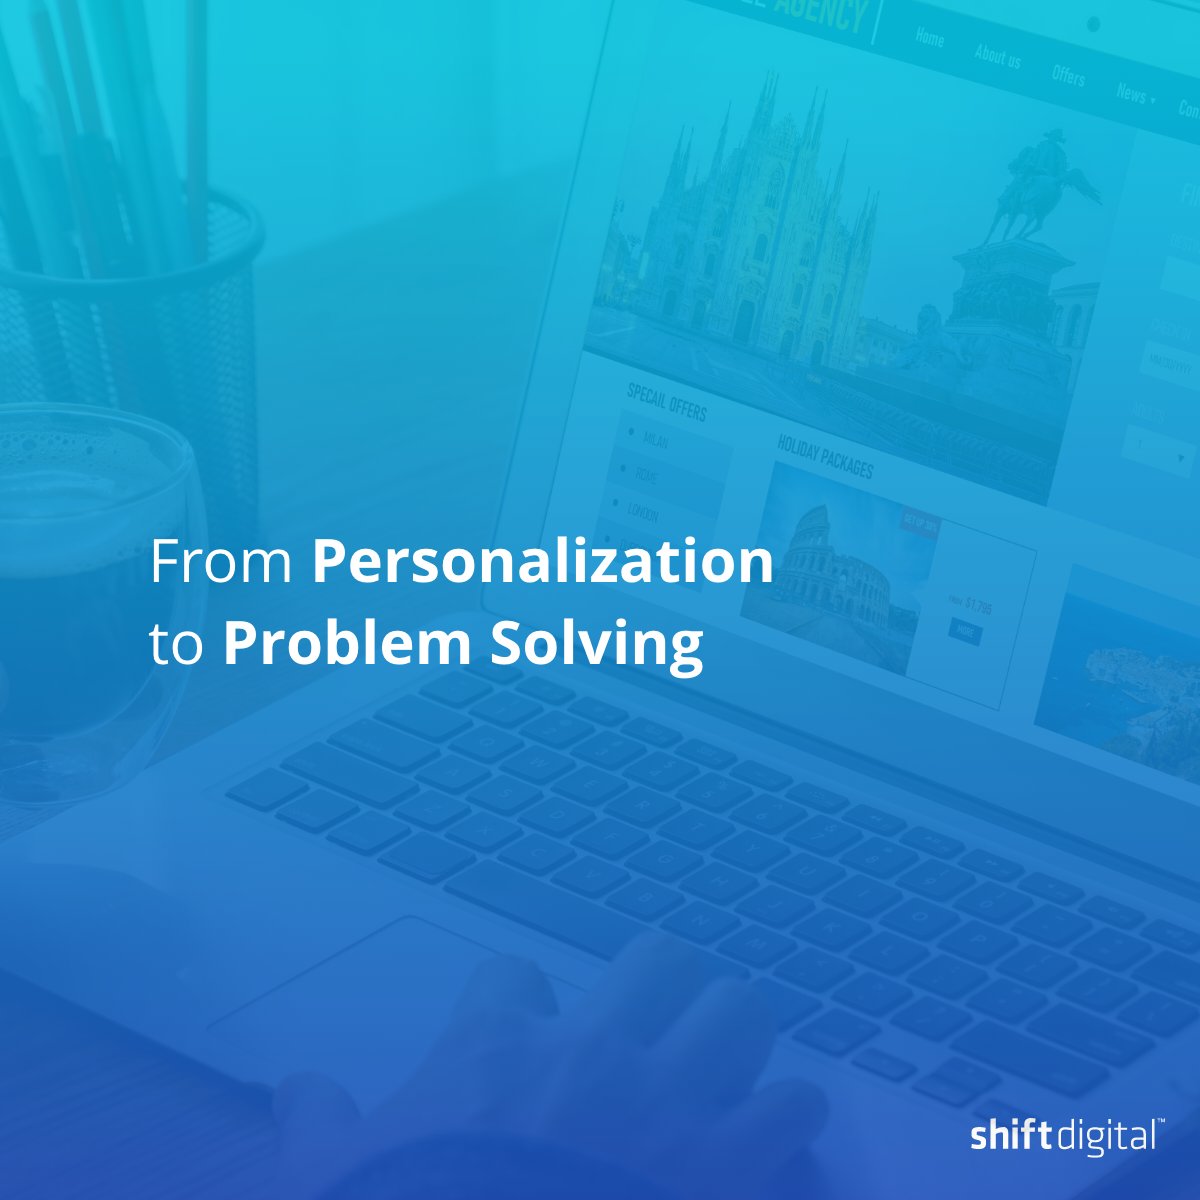 Are you looking to take your #hotel's customer experience to the next level? Learn how hoteliers are leveraging AI to personalize and exceed guest expectations. ow.ly/ZgqM50Qgyp0 #AIinHospitality #CustomerExperience #ShiftDitigal #Hospitality